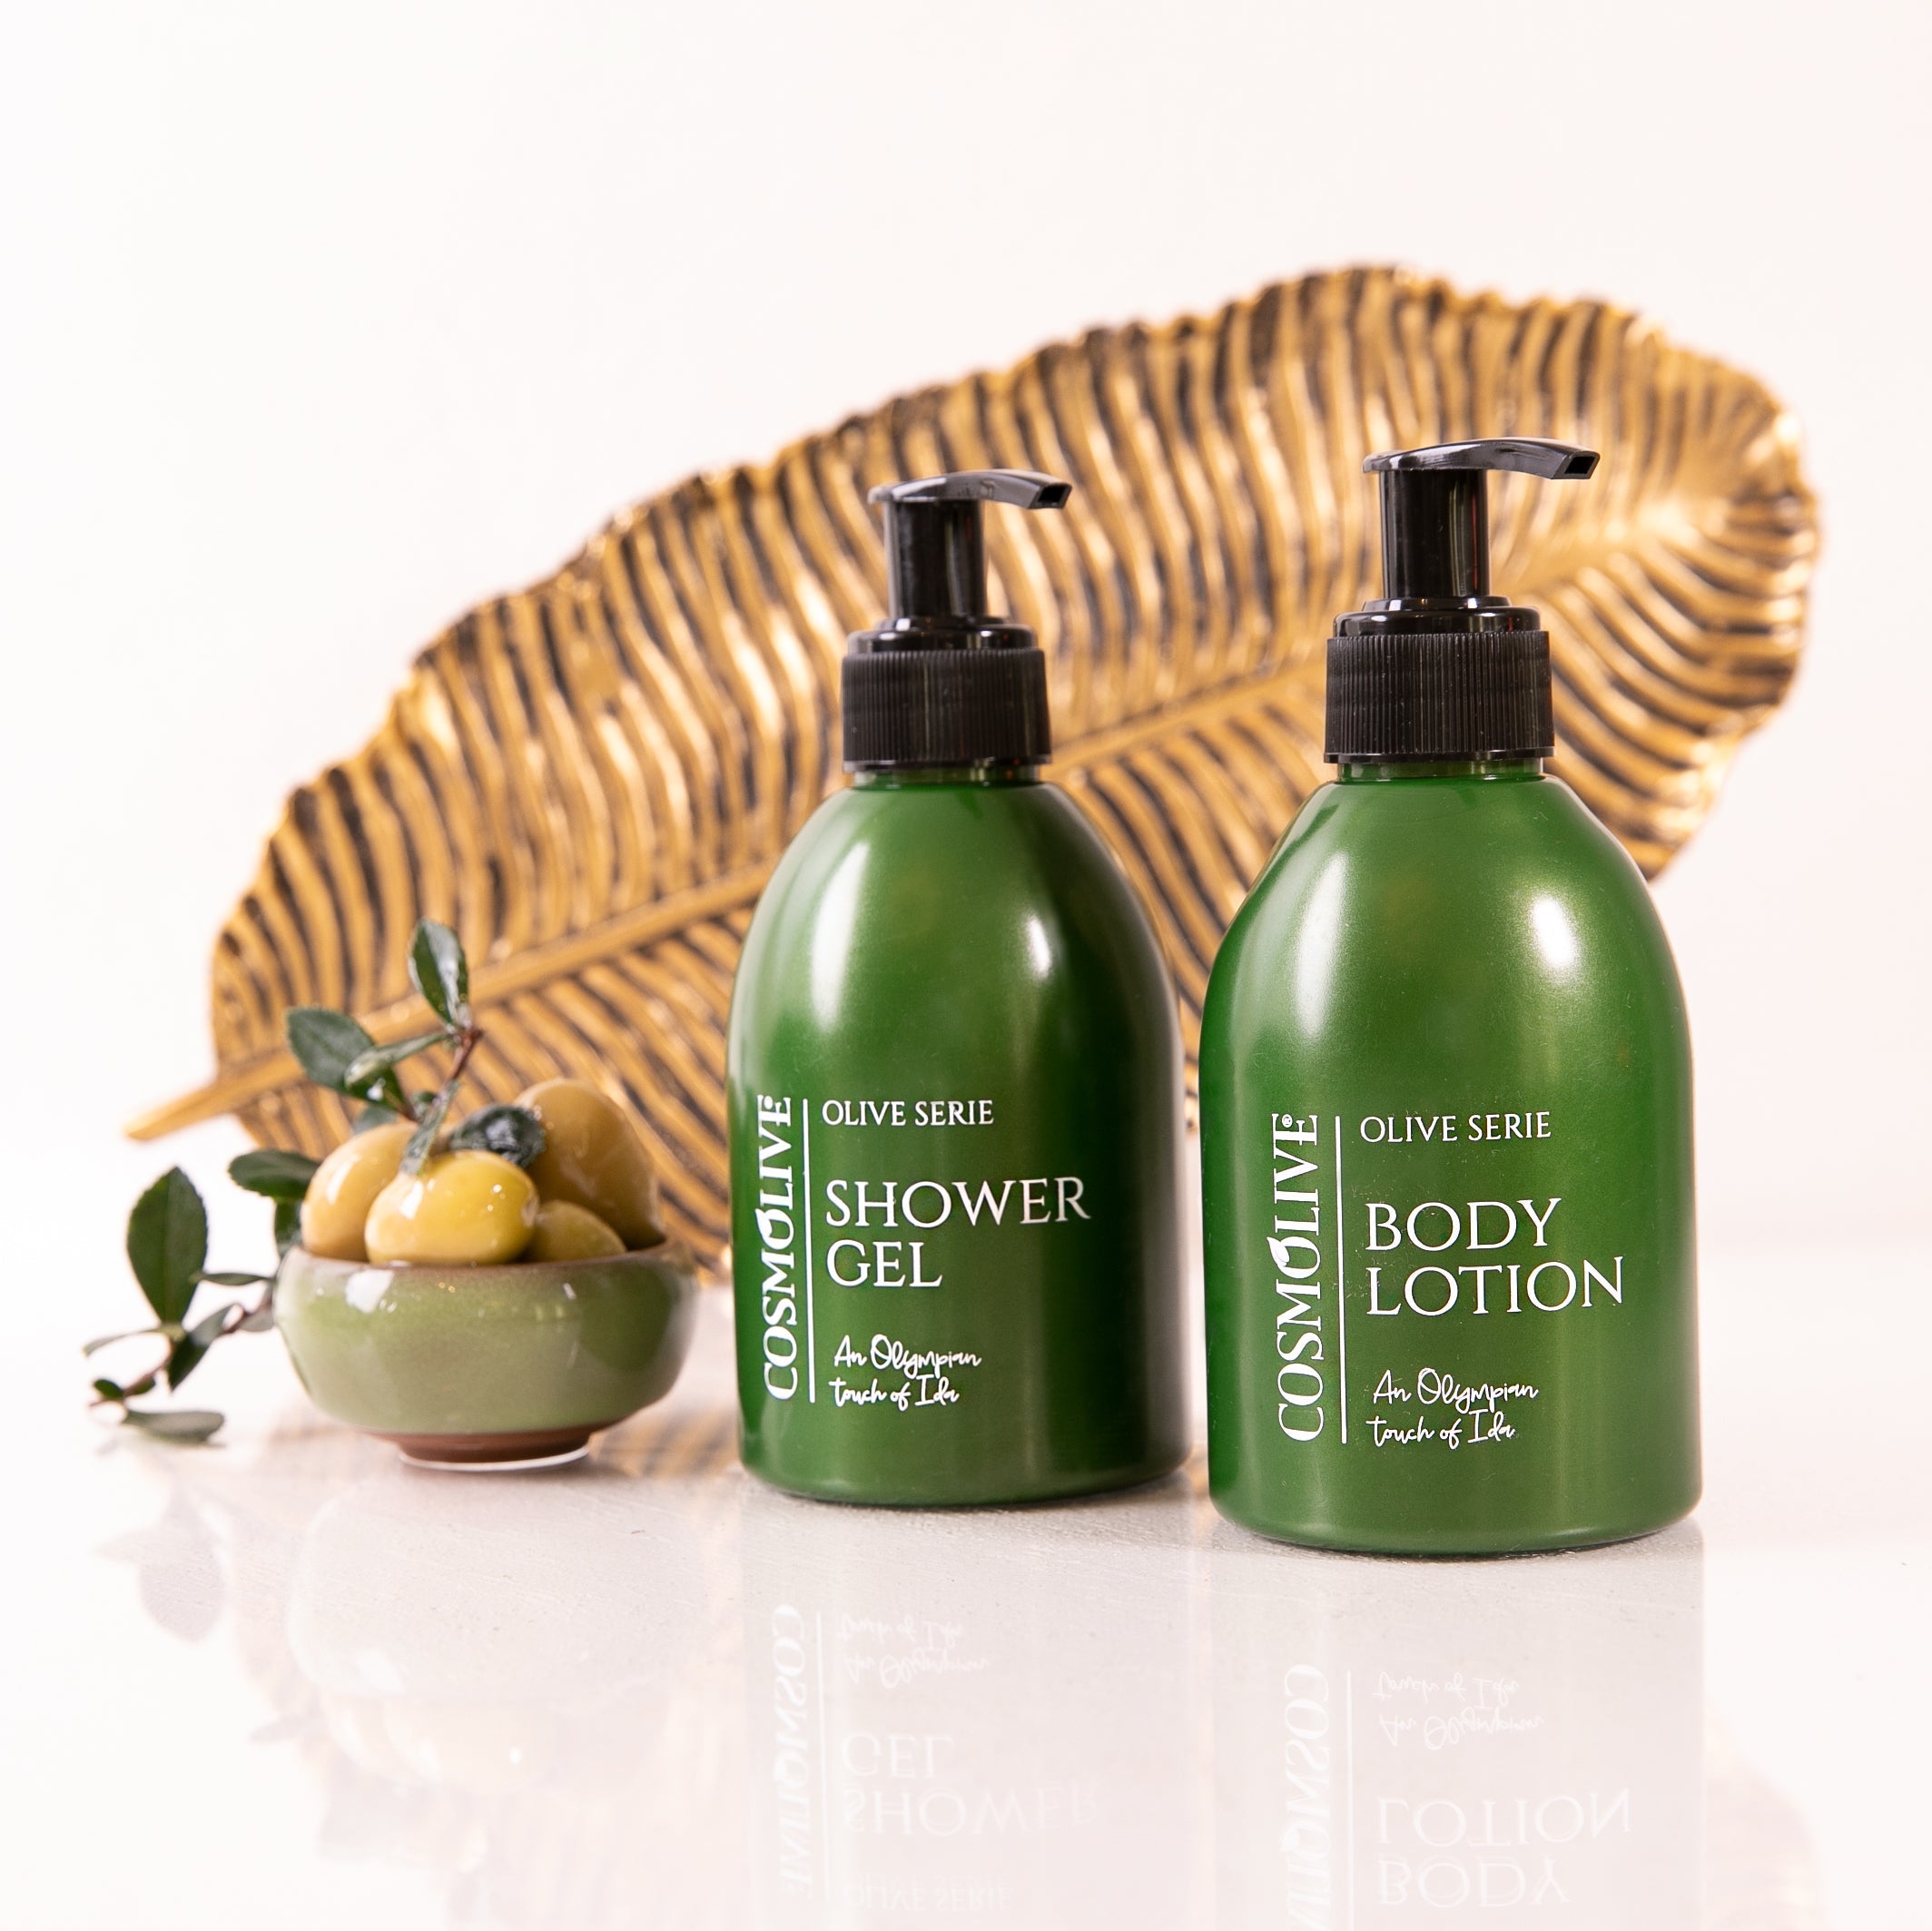 COSMOLIVE OLIVE SERIE SHOWER GEL + BODY LOTION ( 1+ 1 ) 300 ml + 300 ml